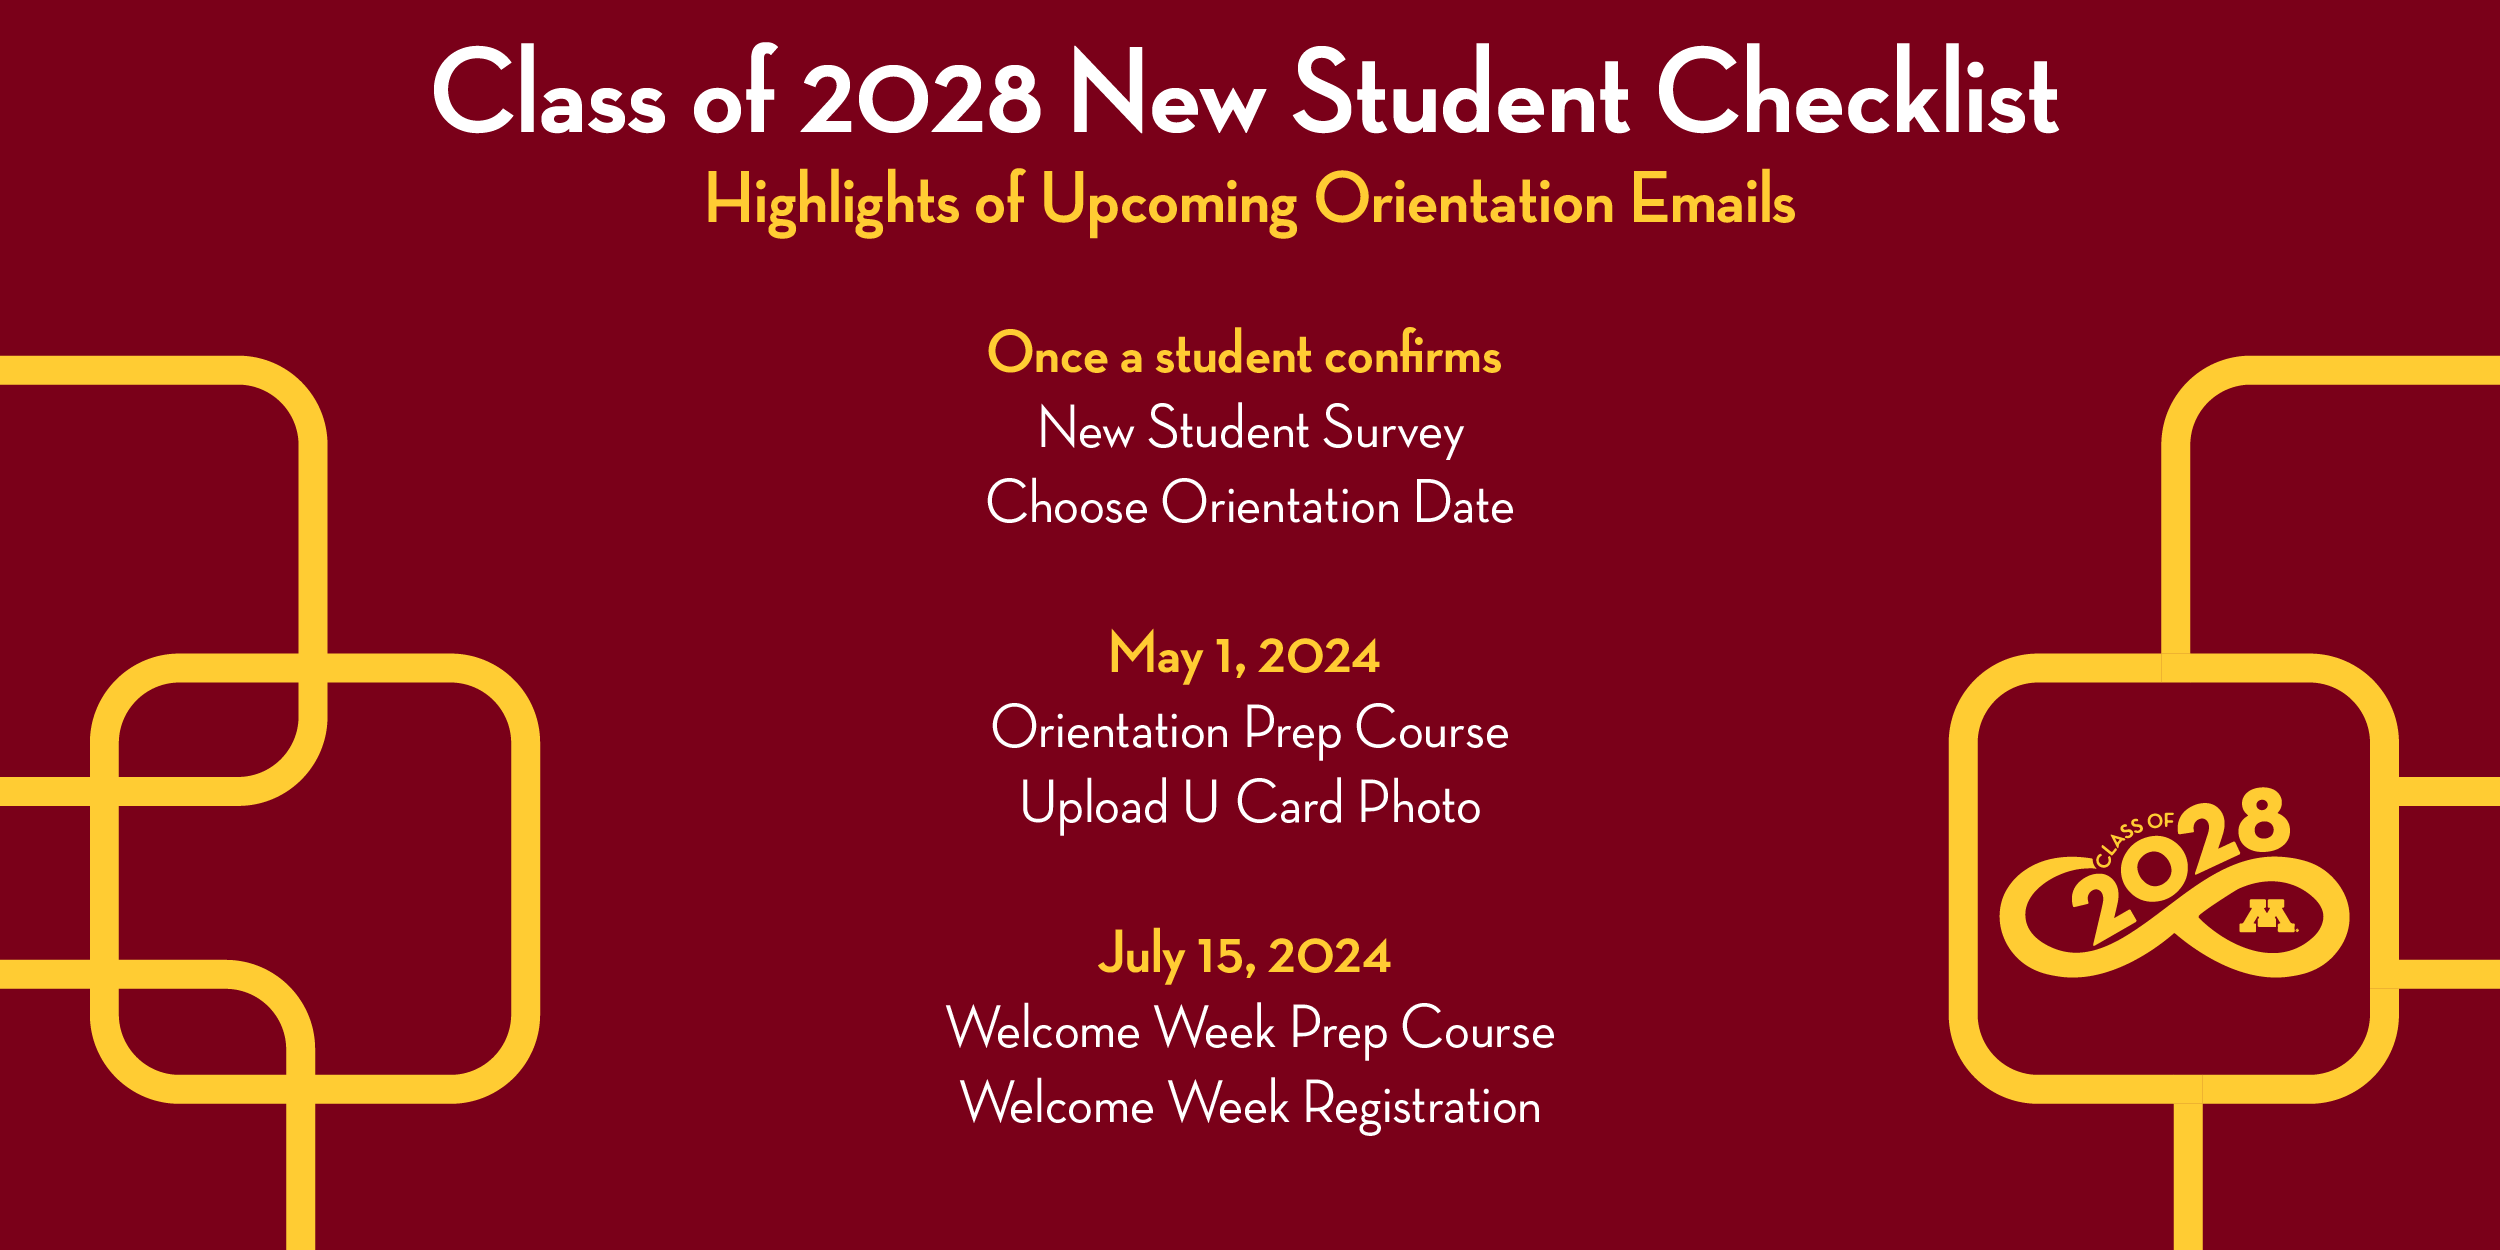 New Student Checklist email timeline. May 1, 2024 students receive second checklist email. July 15 students receive Welcome Week registration email